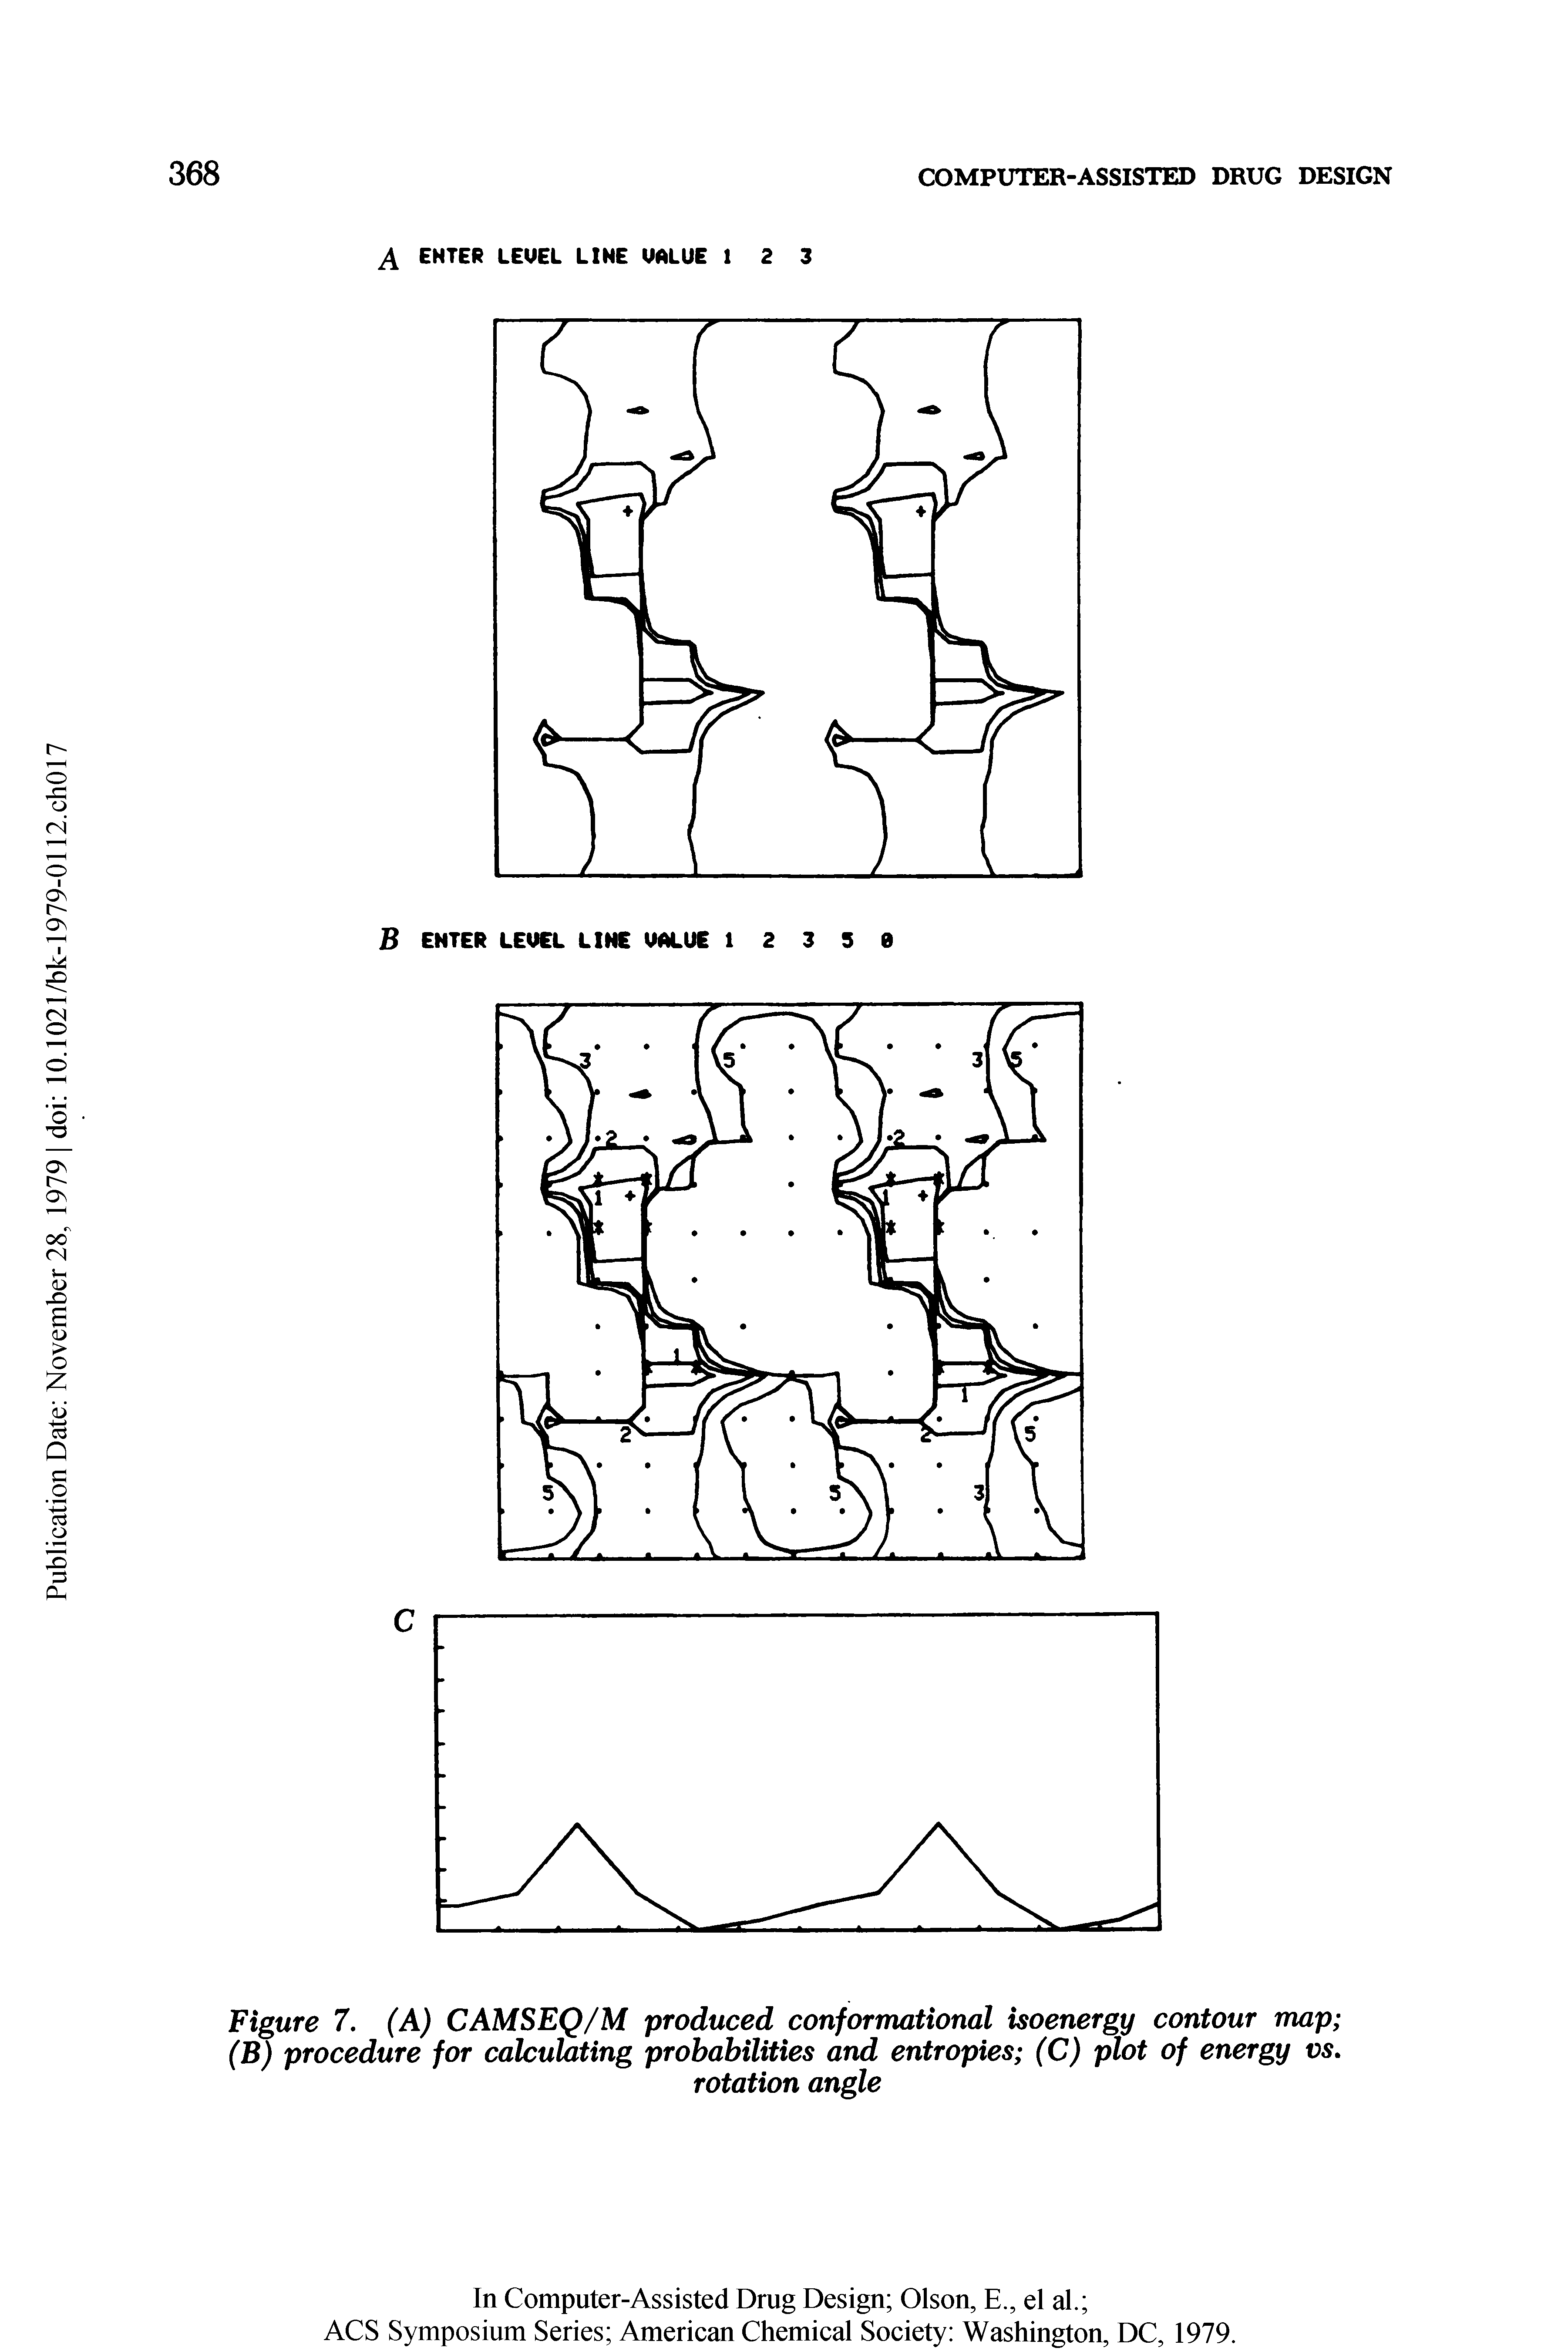 Figure 7. (A) CAMSEQ/M produced conformational isoenergy contour map (B) procedure for calculating probabilities and entropies (C) plot of energy vs.